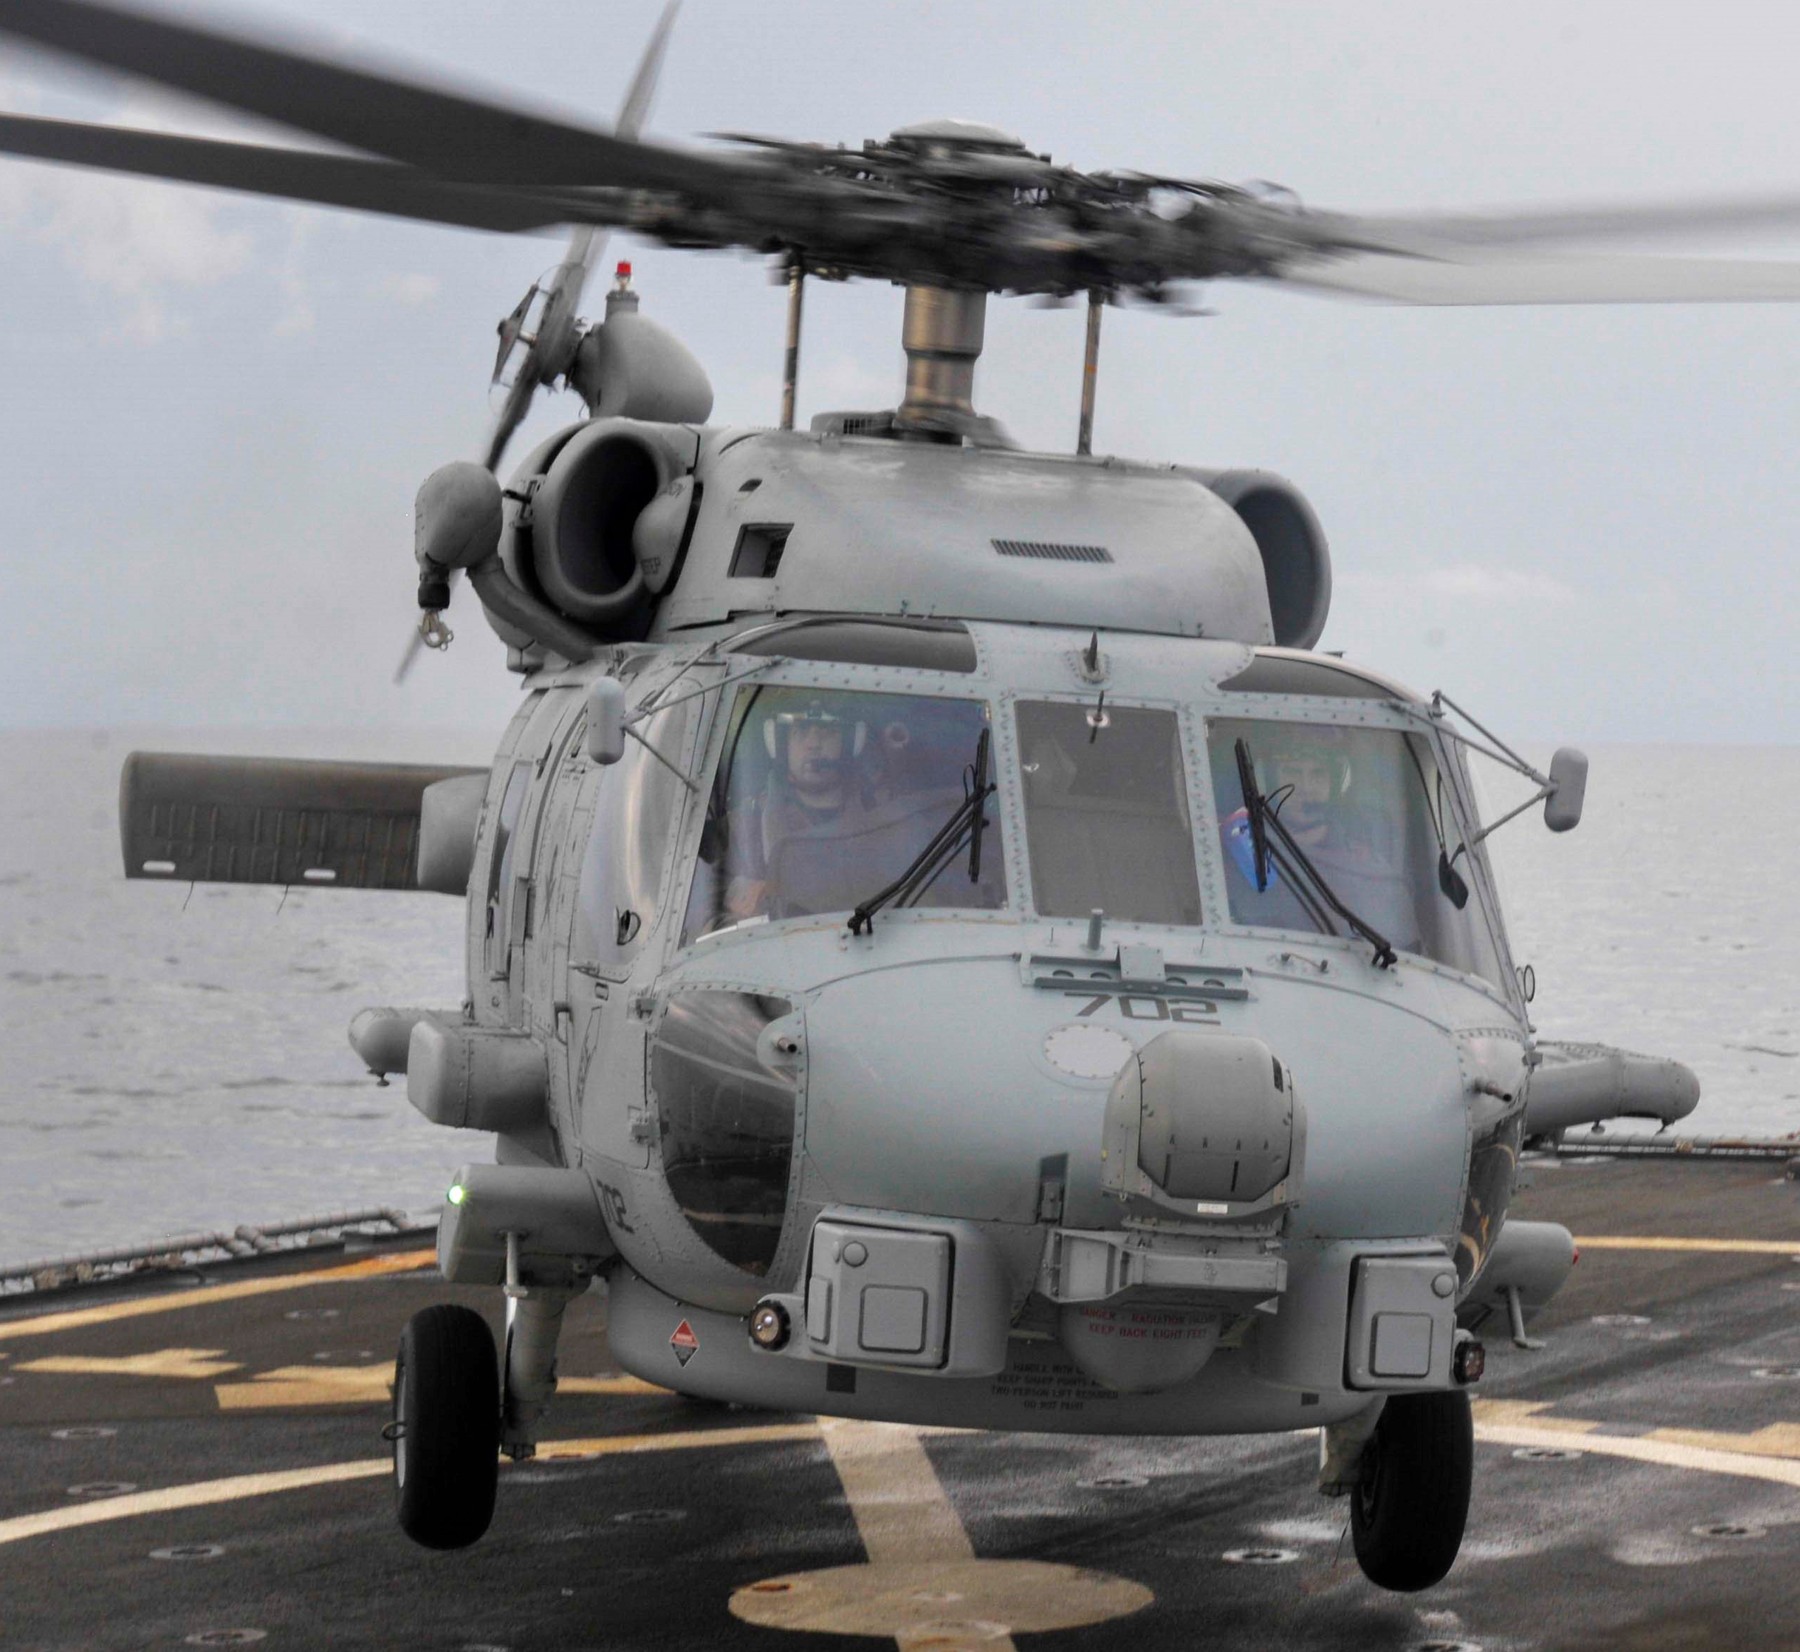 hsm-70 spartans helicopter maritime strike squadron mh-60r seahawk 2016 17 uss laboon ddg-58